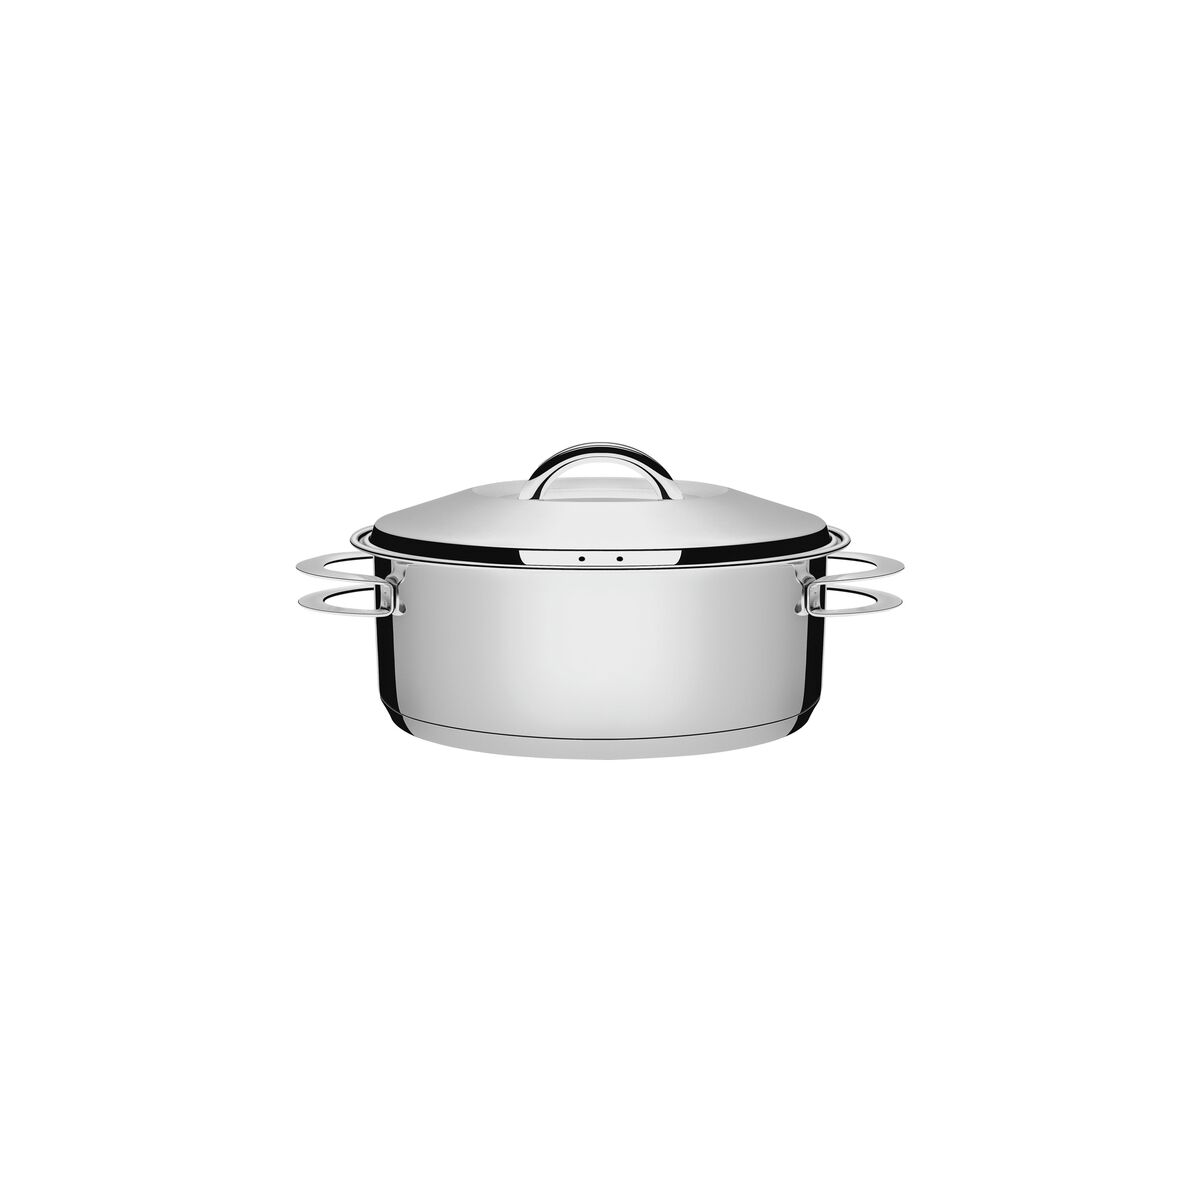 Tramontina Solar 16 cm 1.4 L stainless steel shallow casserole dish with lid, handles and tri-ply base